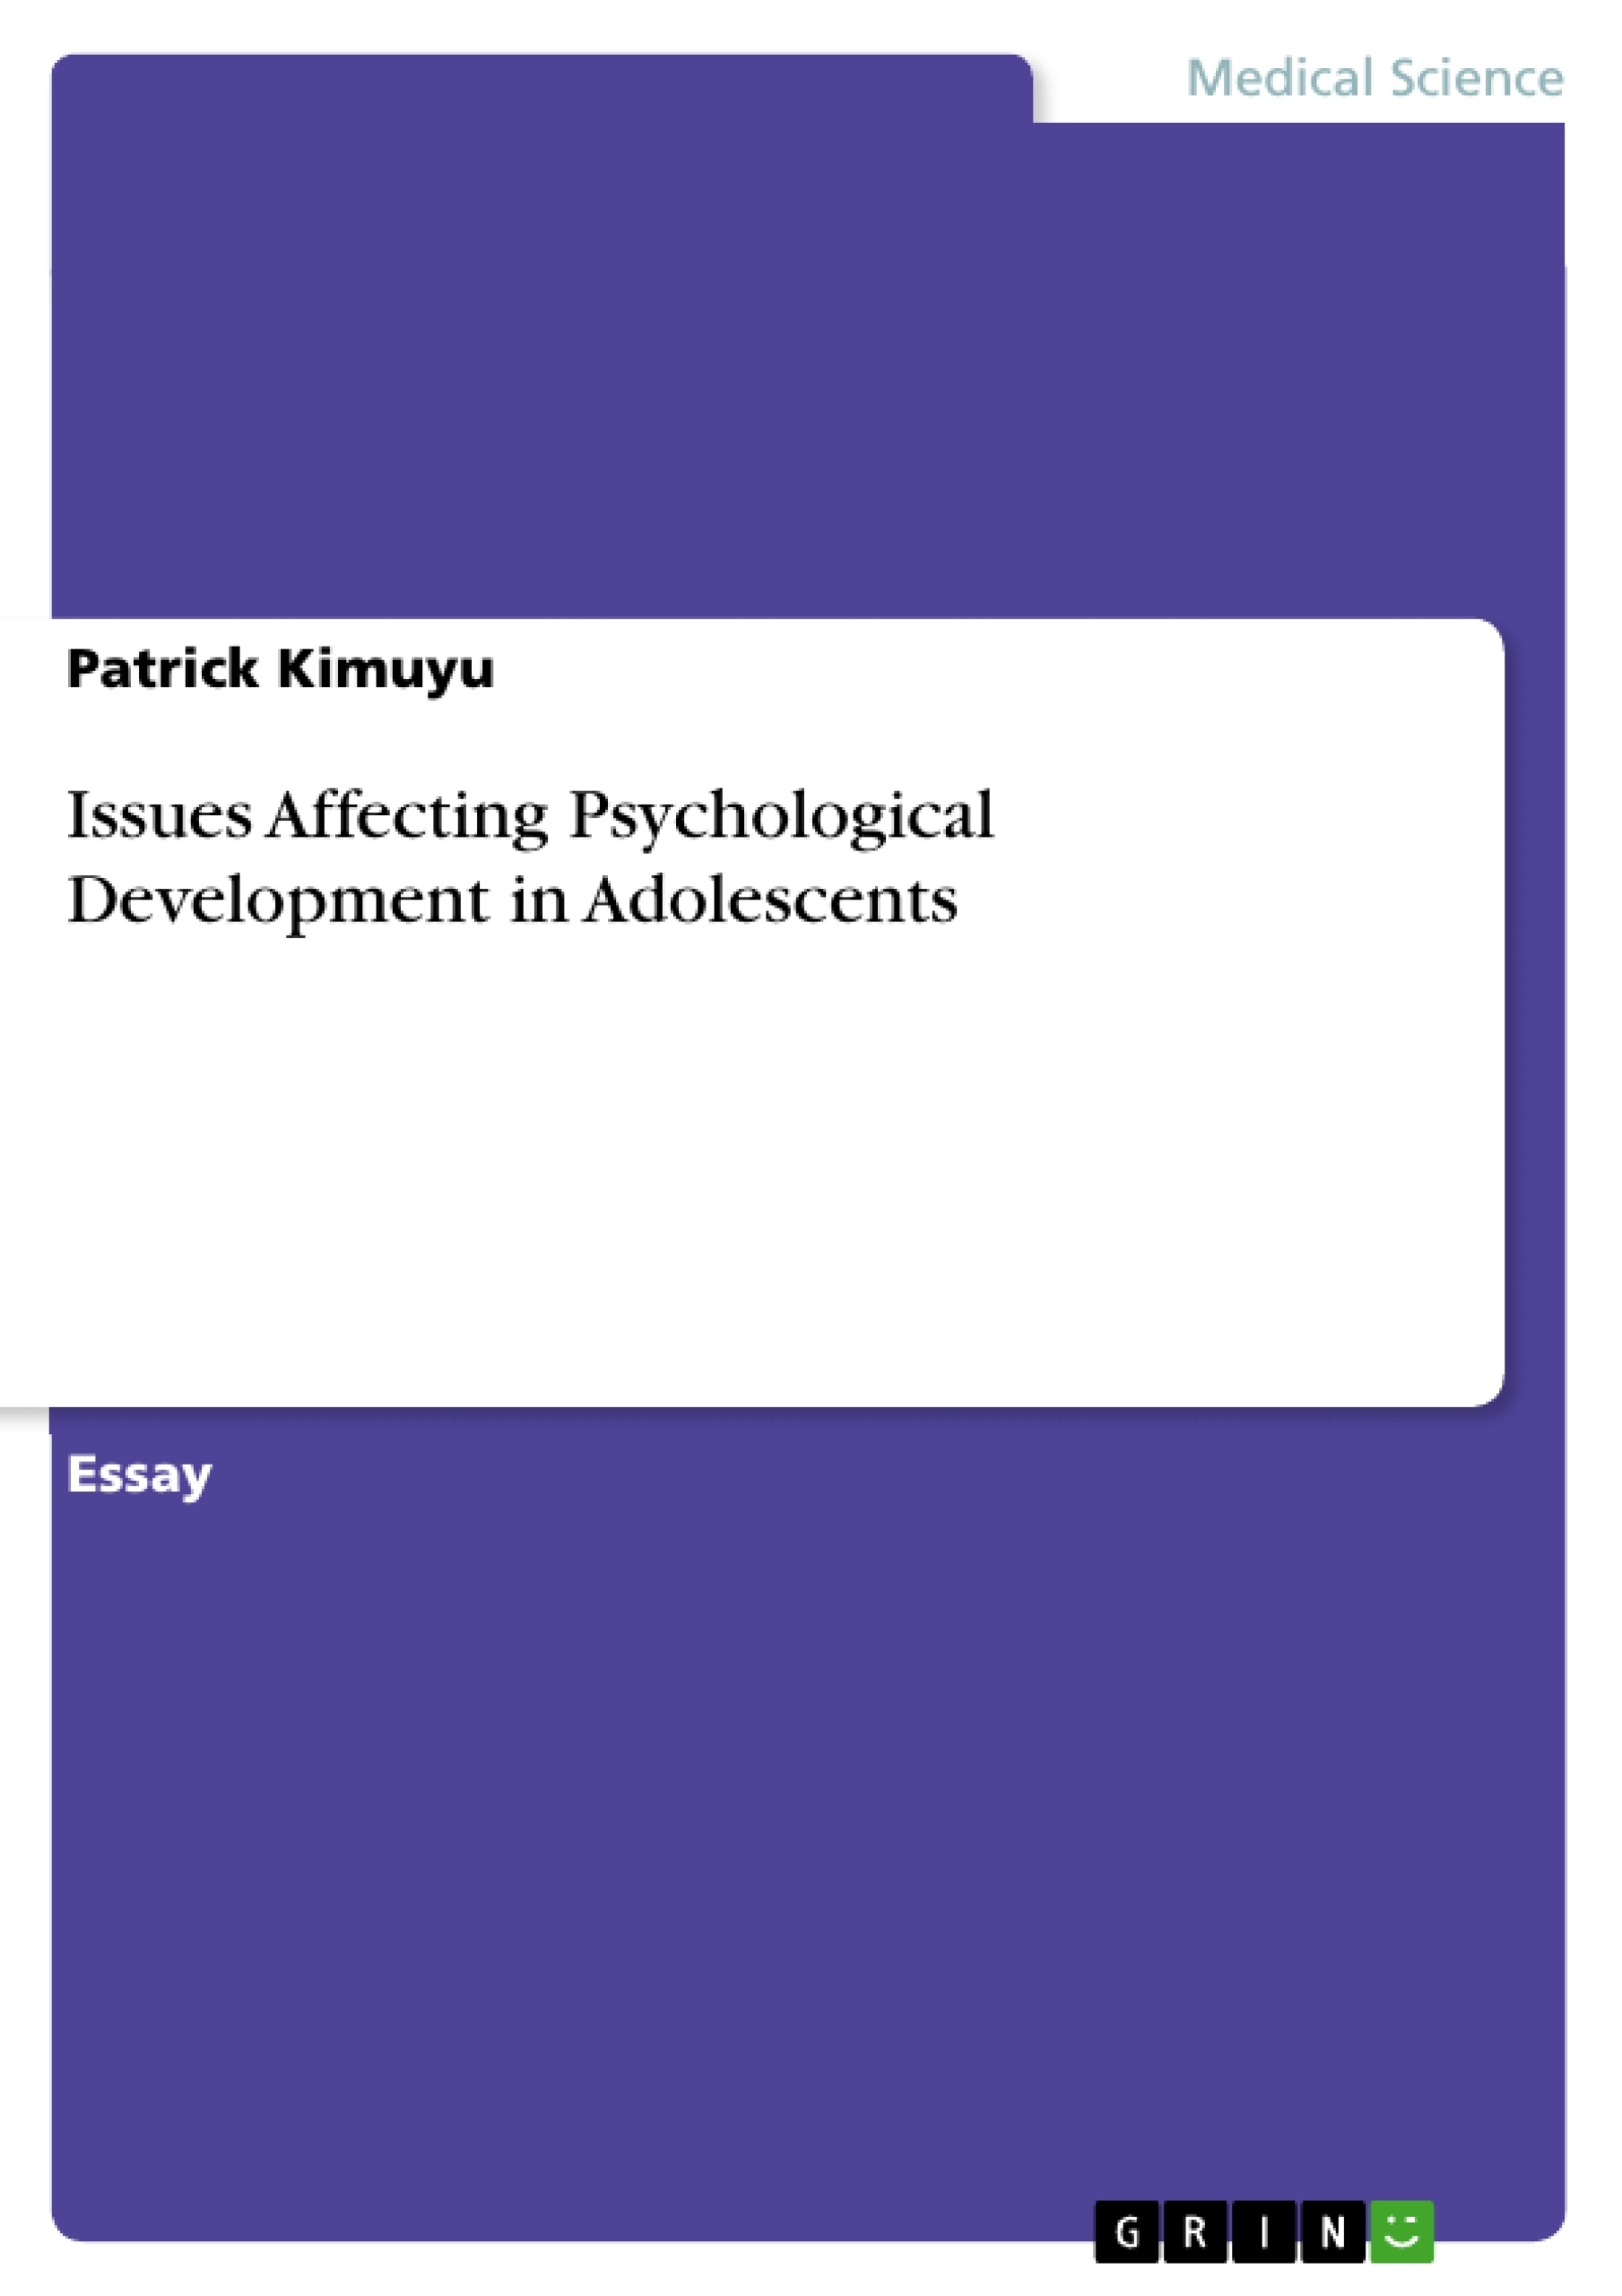 Title: Issues Affecting Psychological Development in Adolescents